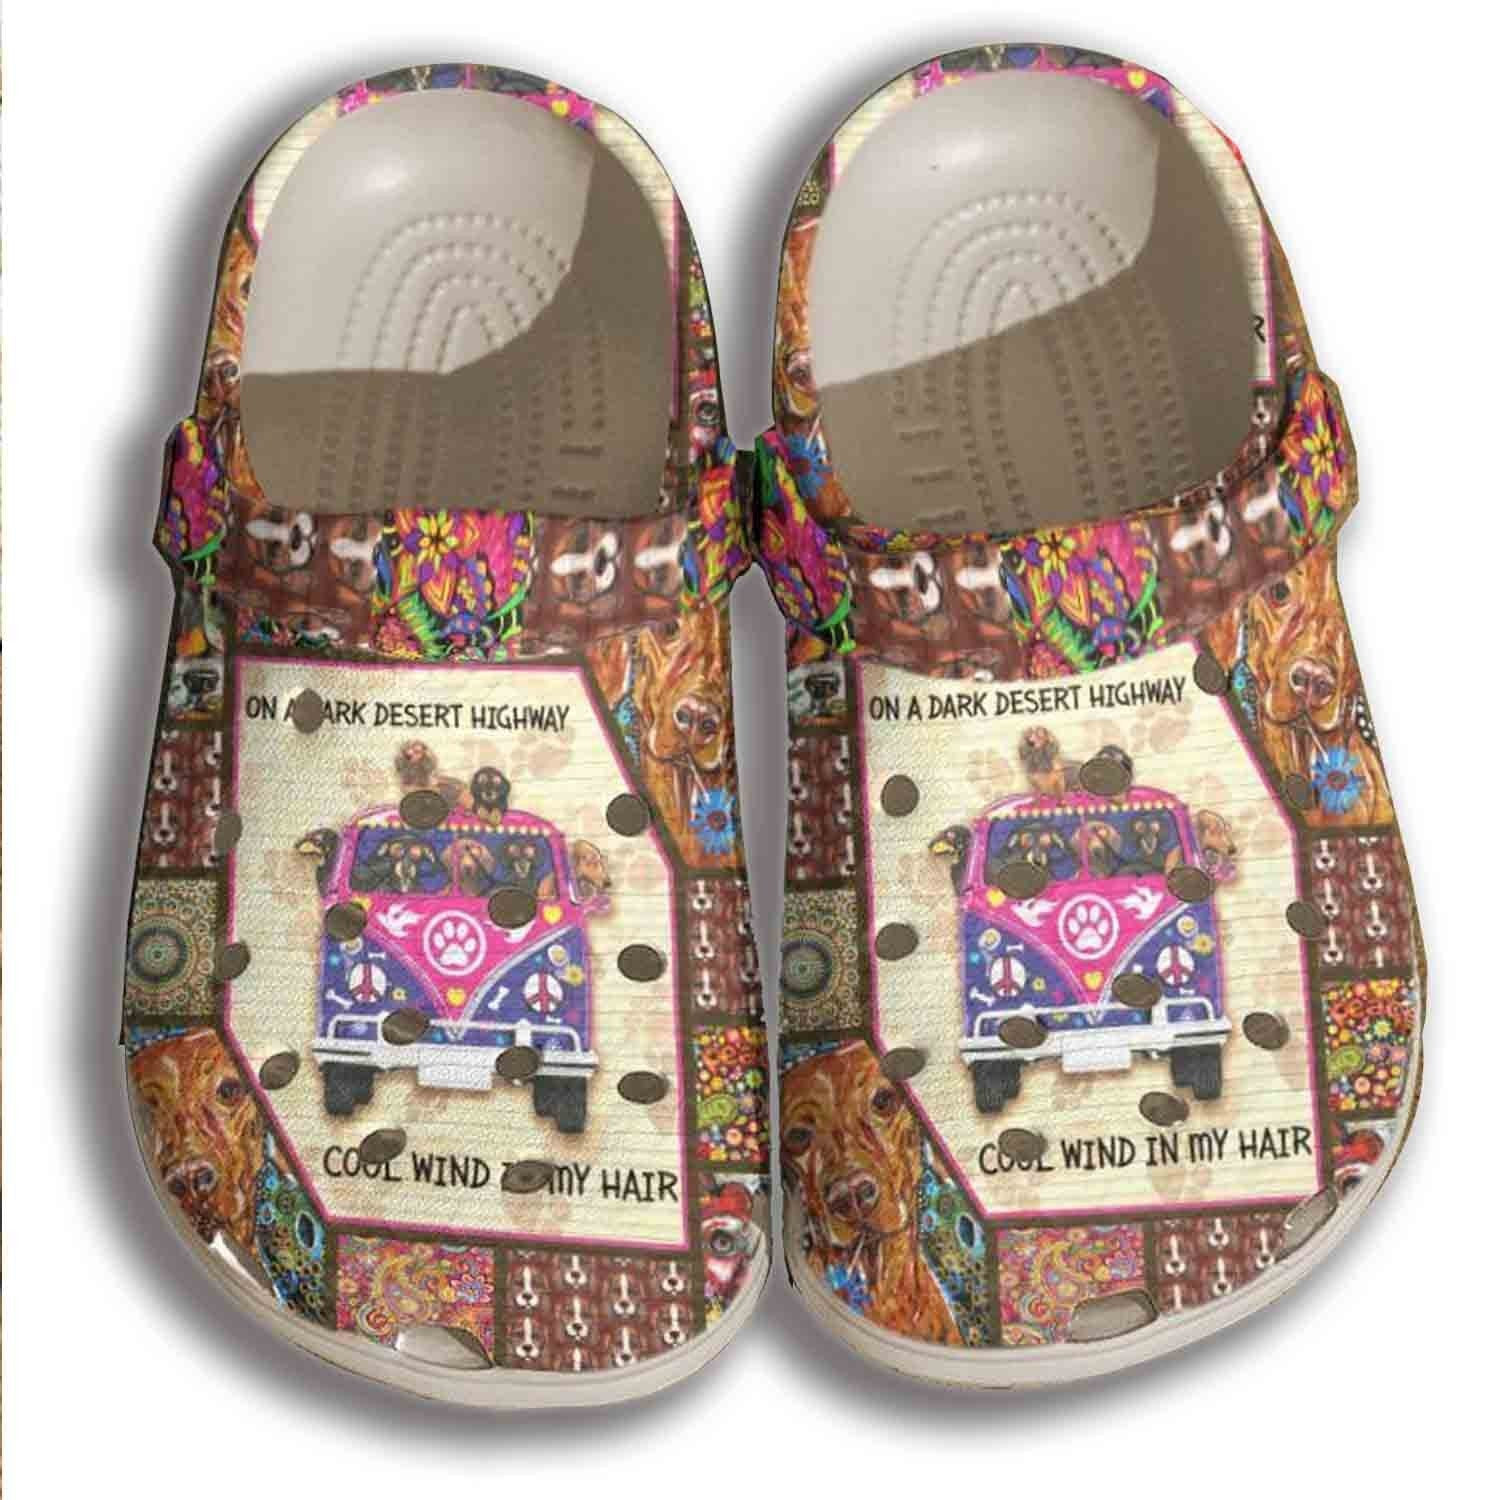 Hippie Dachshund Crocs Shoes - Dog Bus On Highway Clogs Gifts